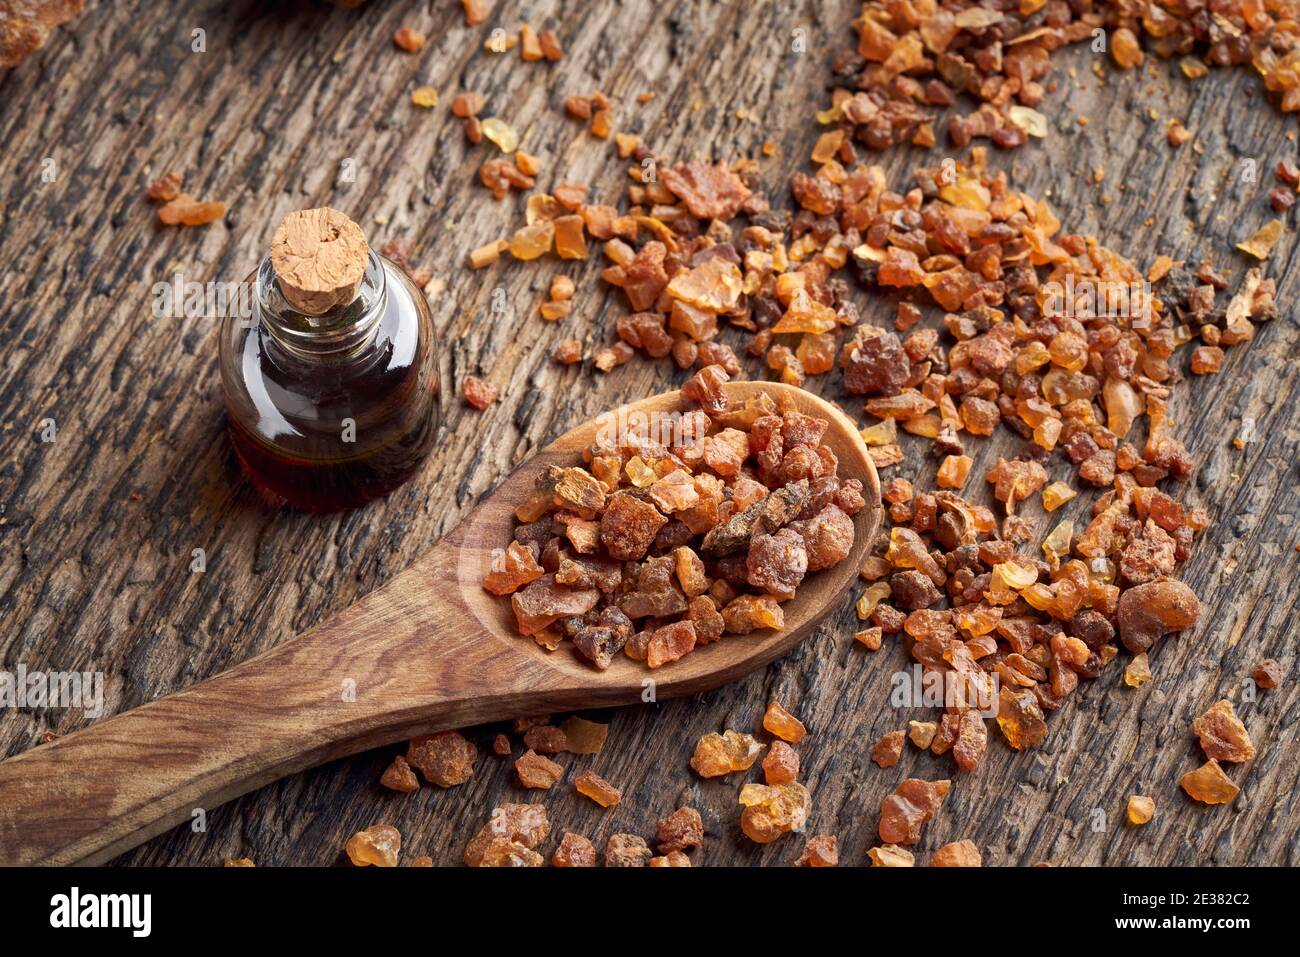 Myrrh resin on a spoon, with Commiphora essential oil in the background Stock Photo